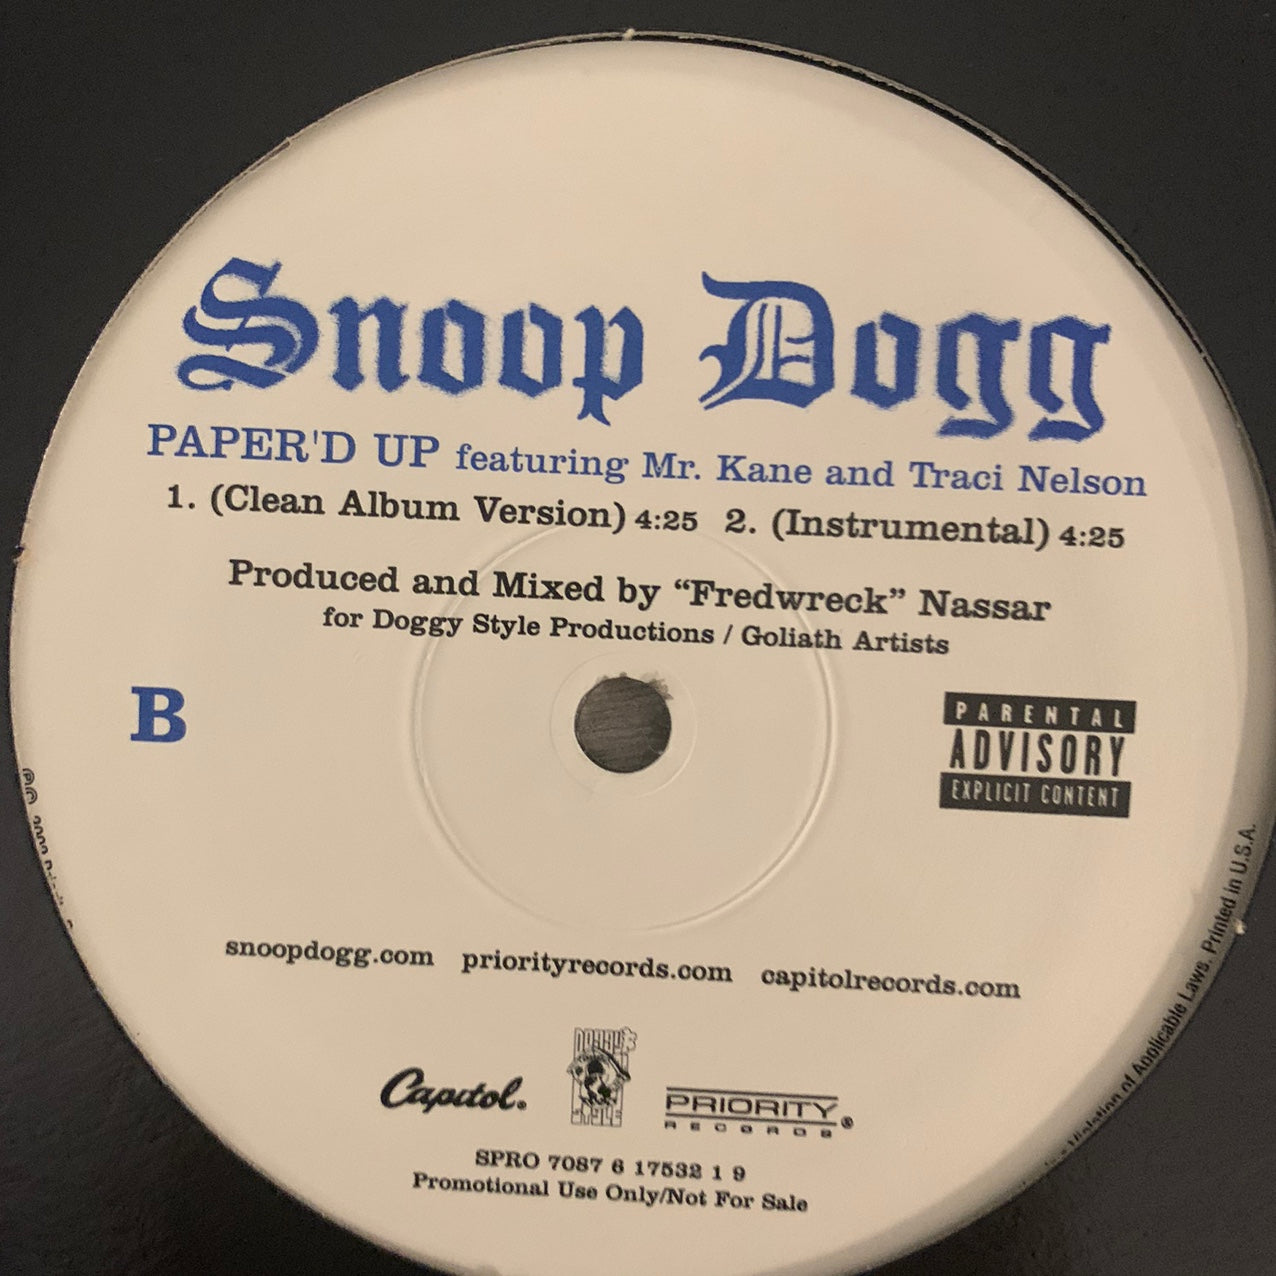 Snoop Dogg “From Tha Chuuuch To Da Palace” / “Paper’d Up” 5 Version 12inch Vinyl